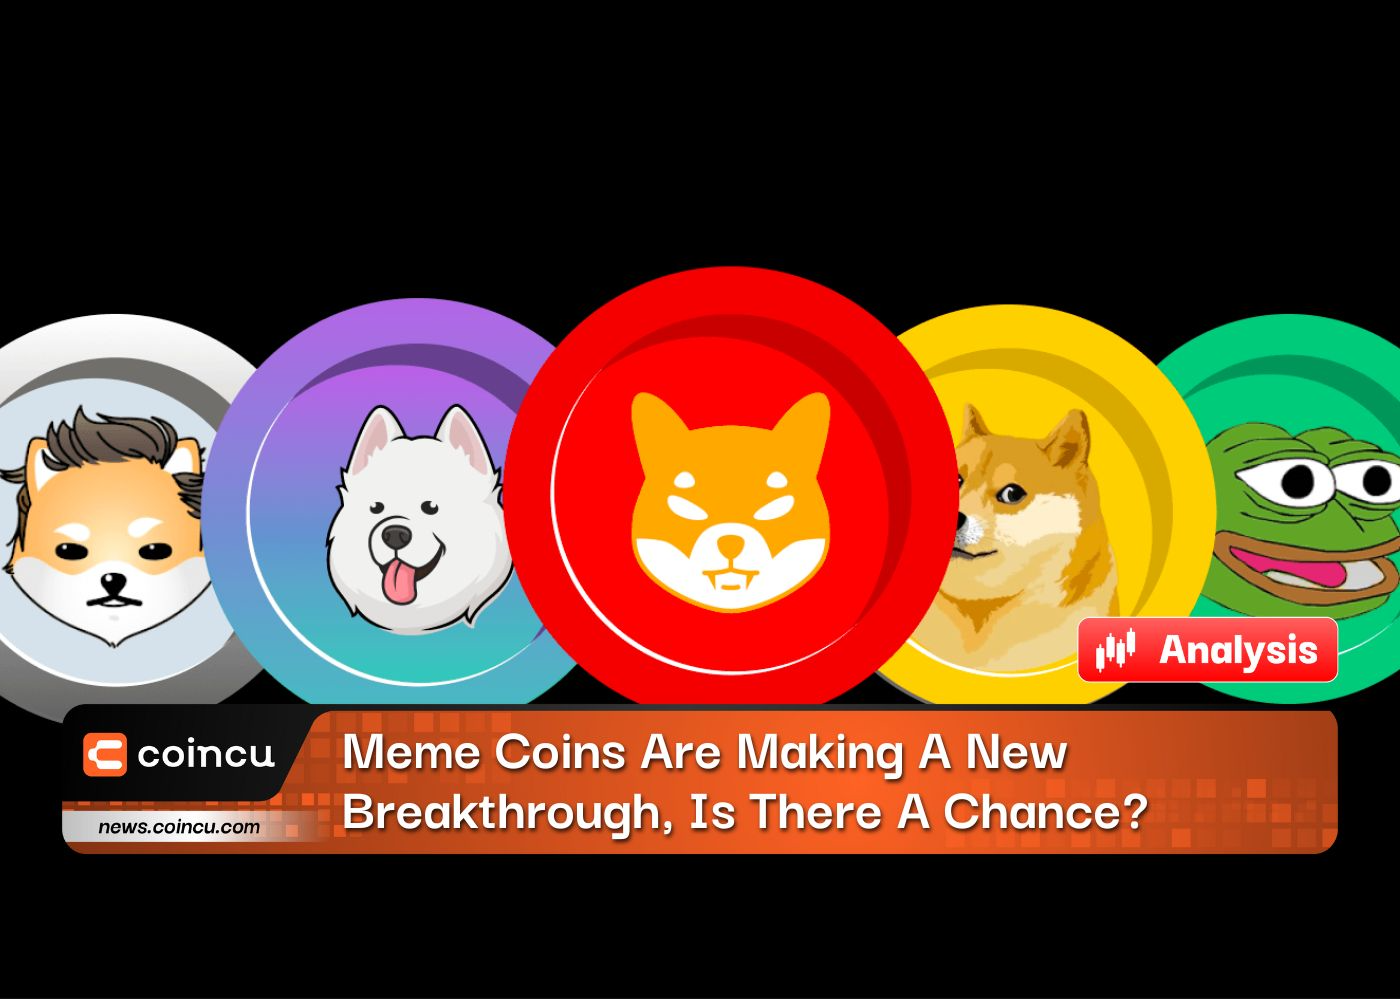 Meme Coins Are Making A New Breakthrough, Is There A Chance?